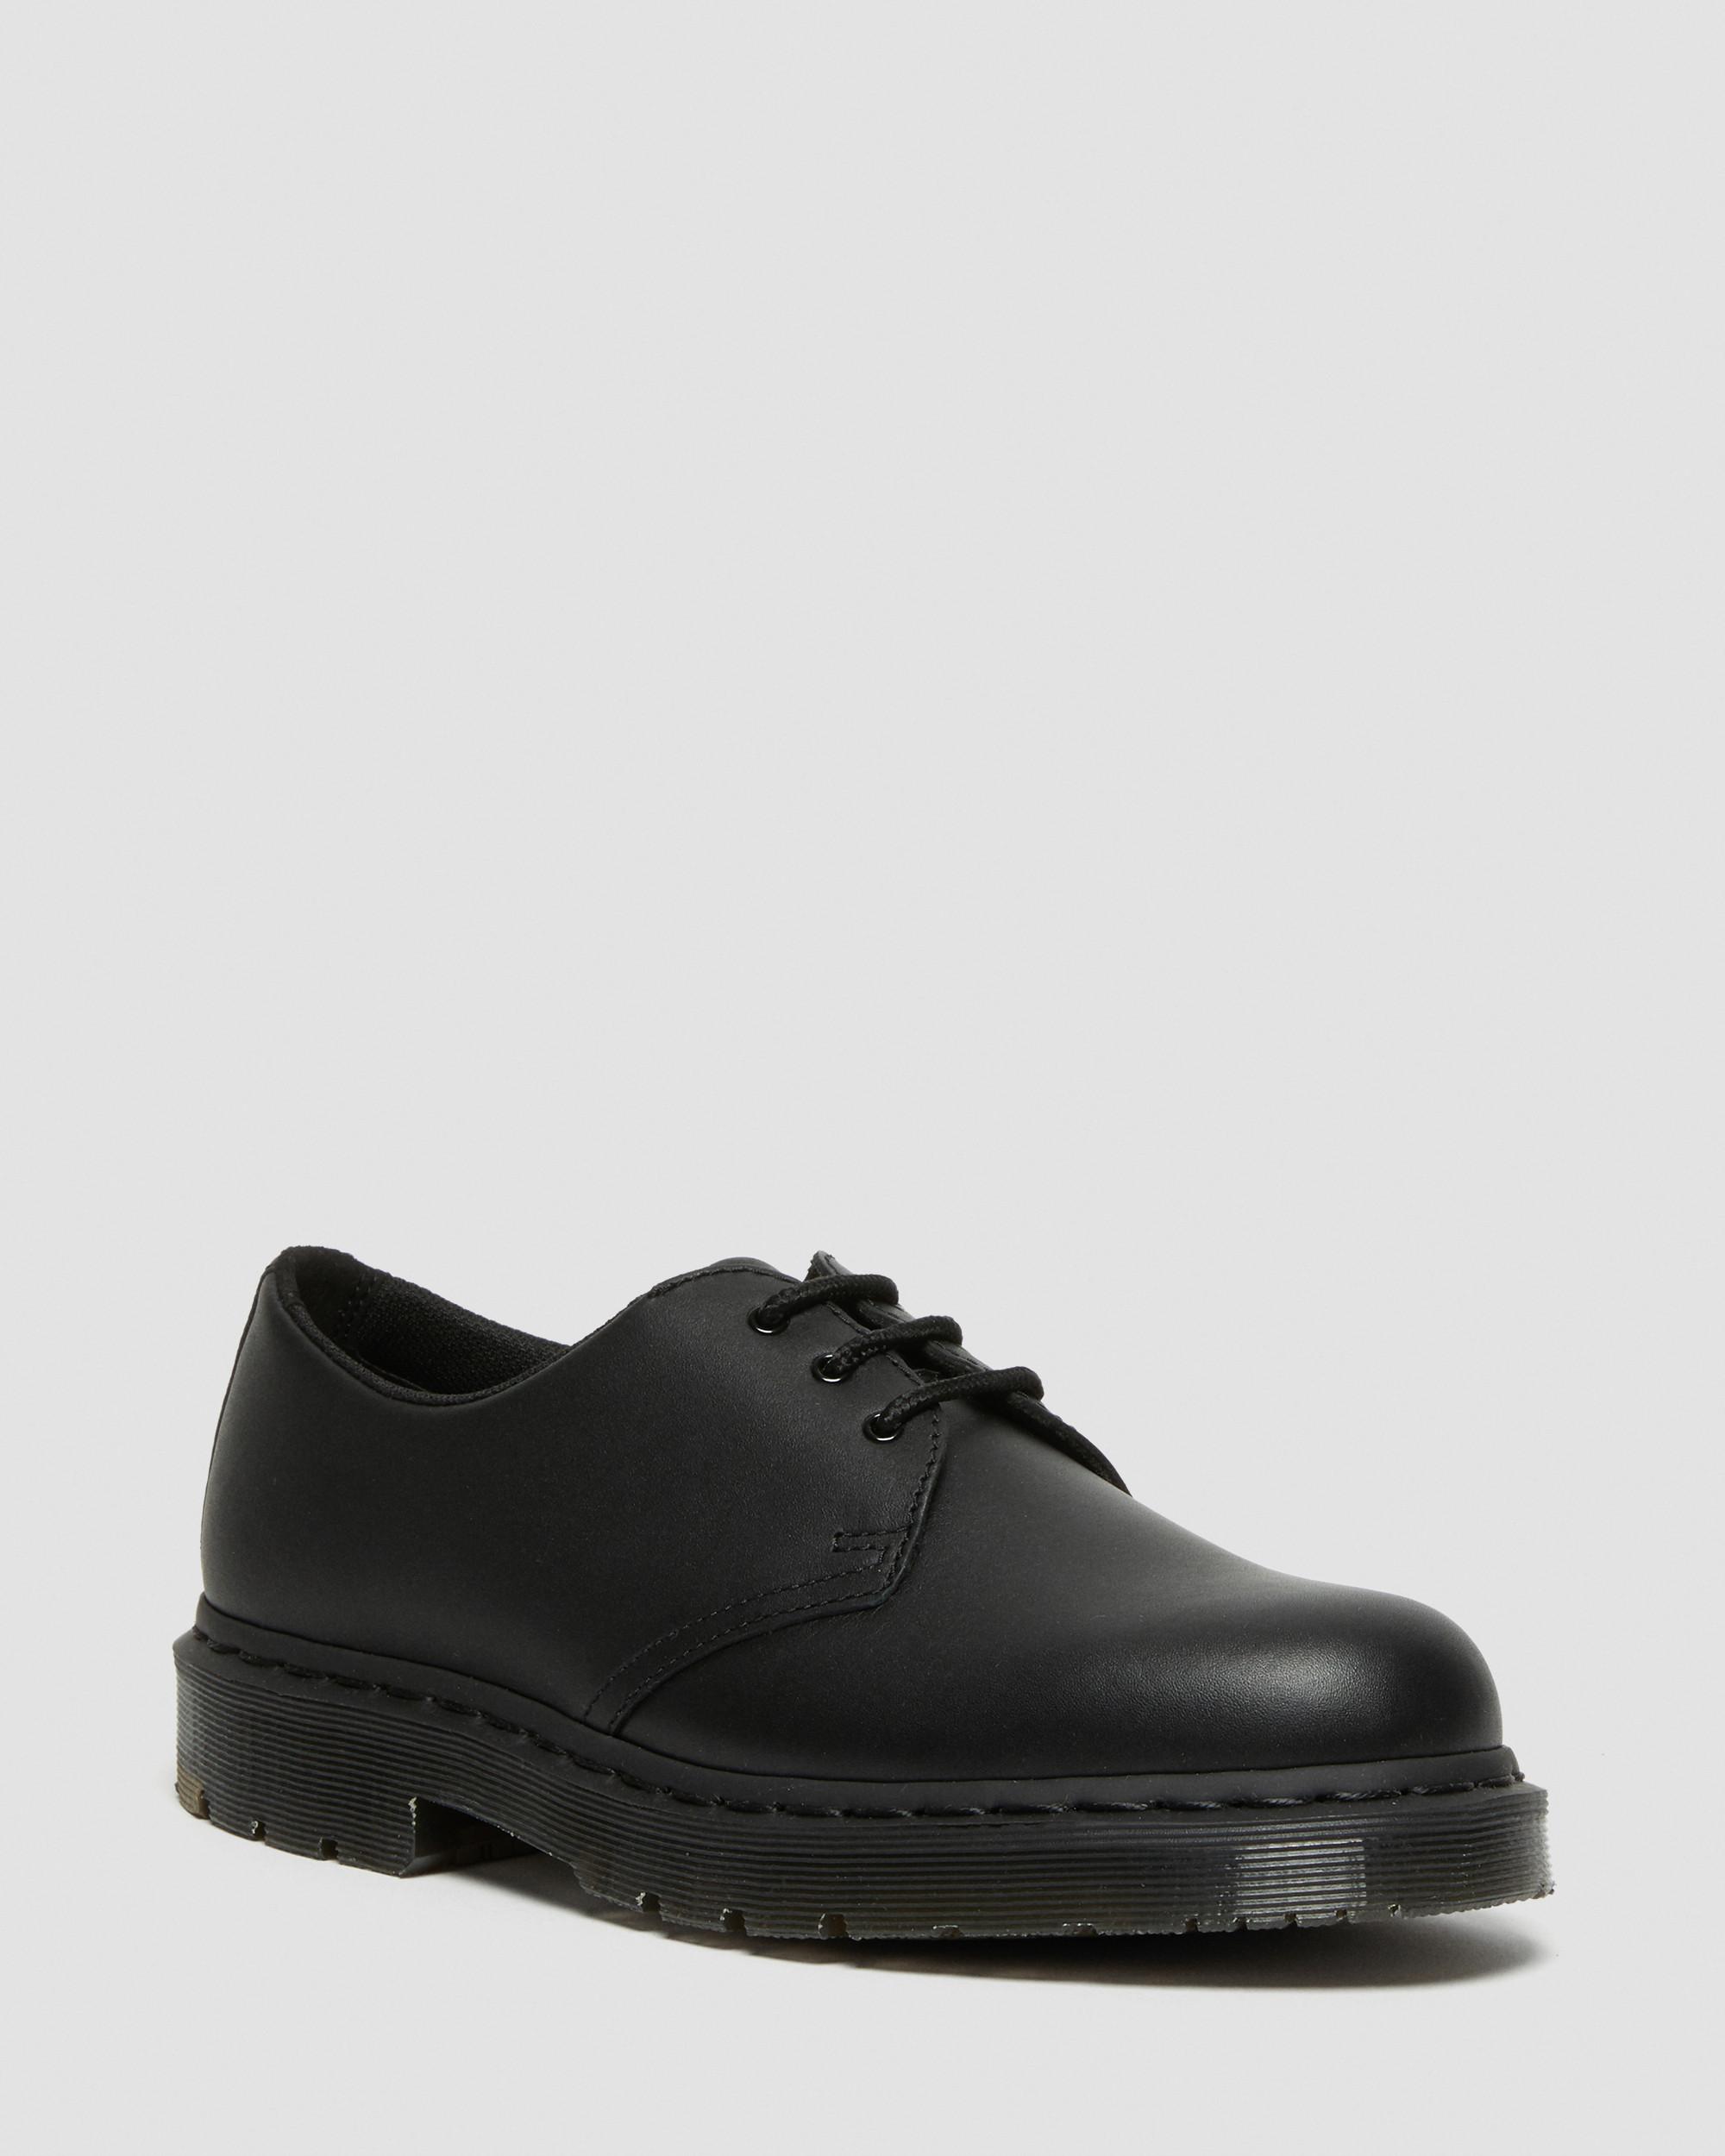 slip resistant oxford work shoes